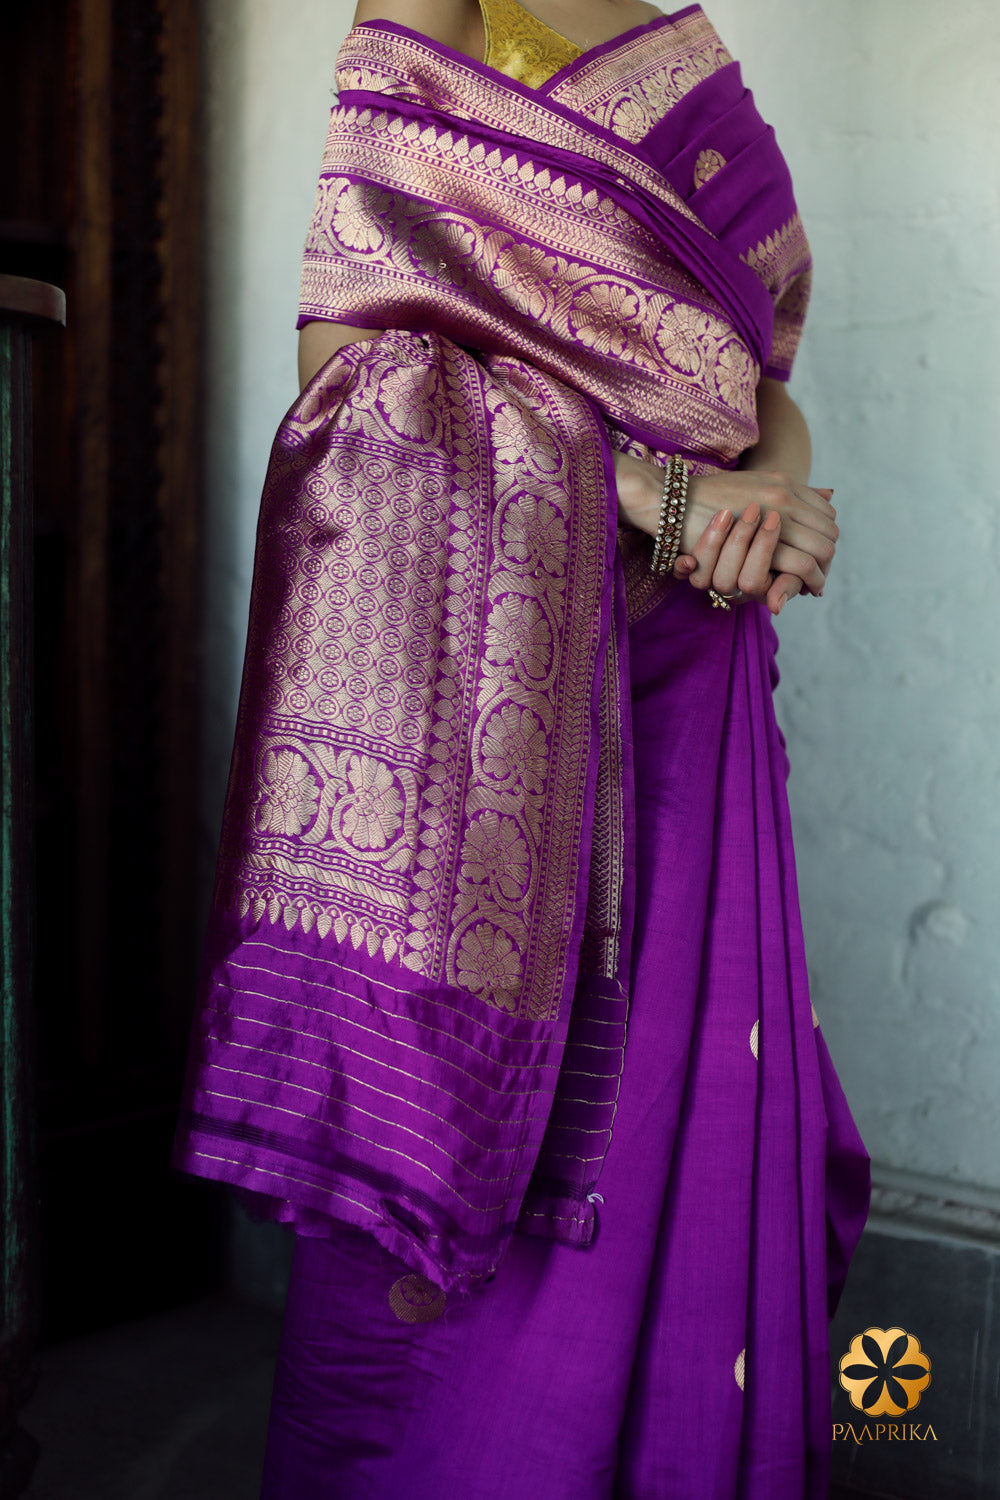 Mesmerizing violet pure silk saree adorned with delicate chand buta weaving, a timeless treasure for your wardrobe.